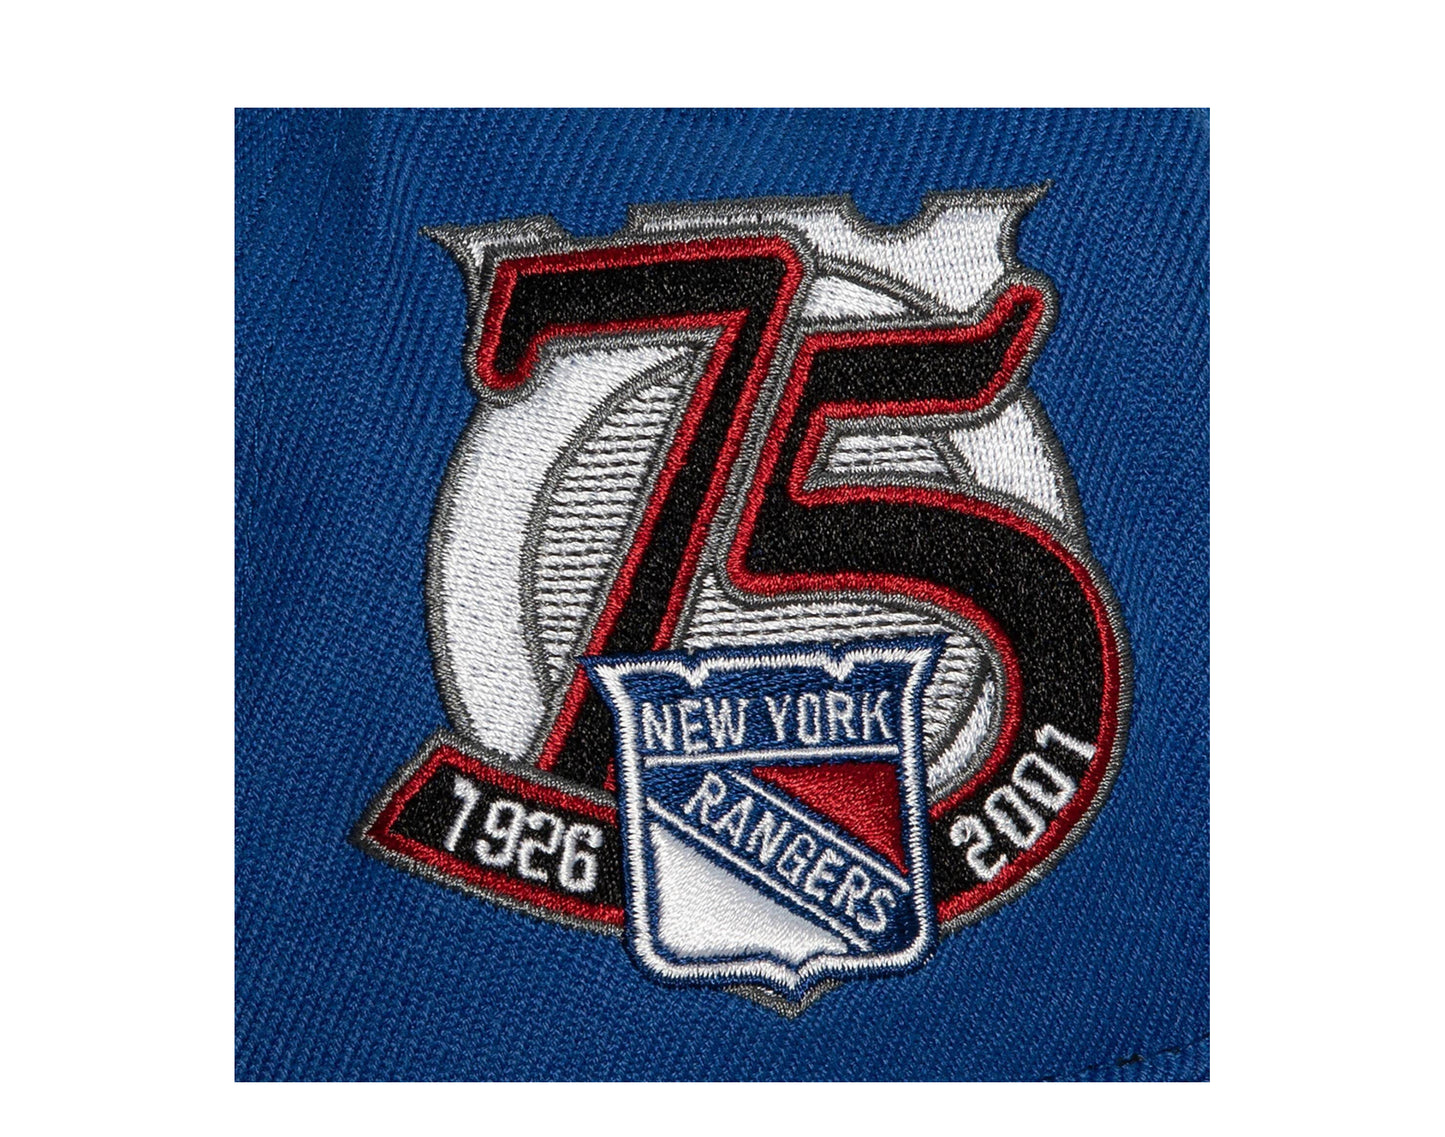 Mitchell & Ness NHL New York Rangers Vintage Fitted Hat